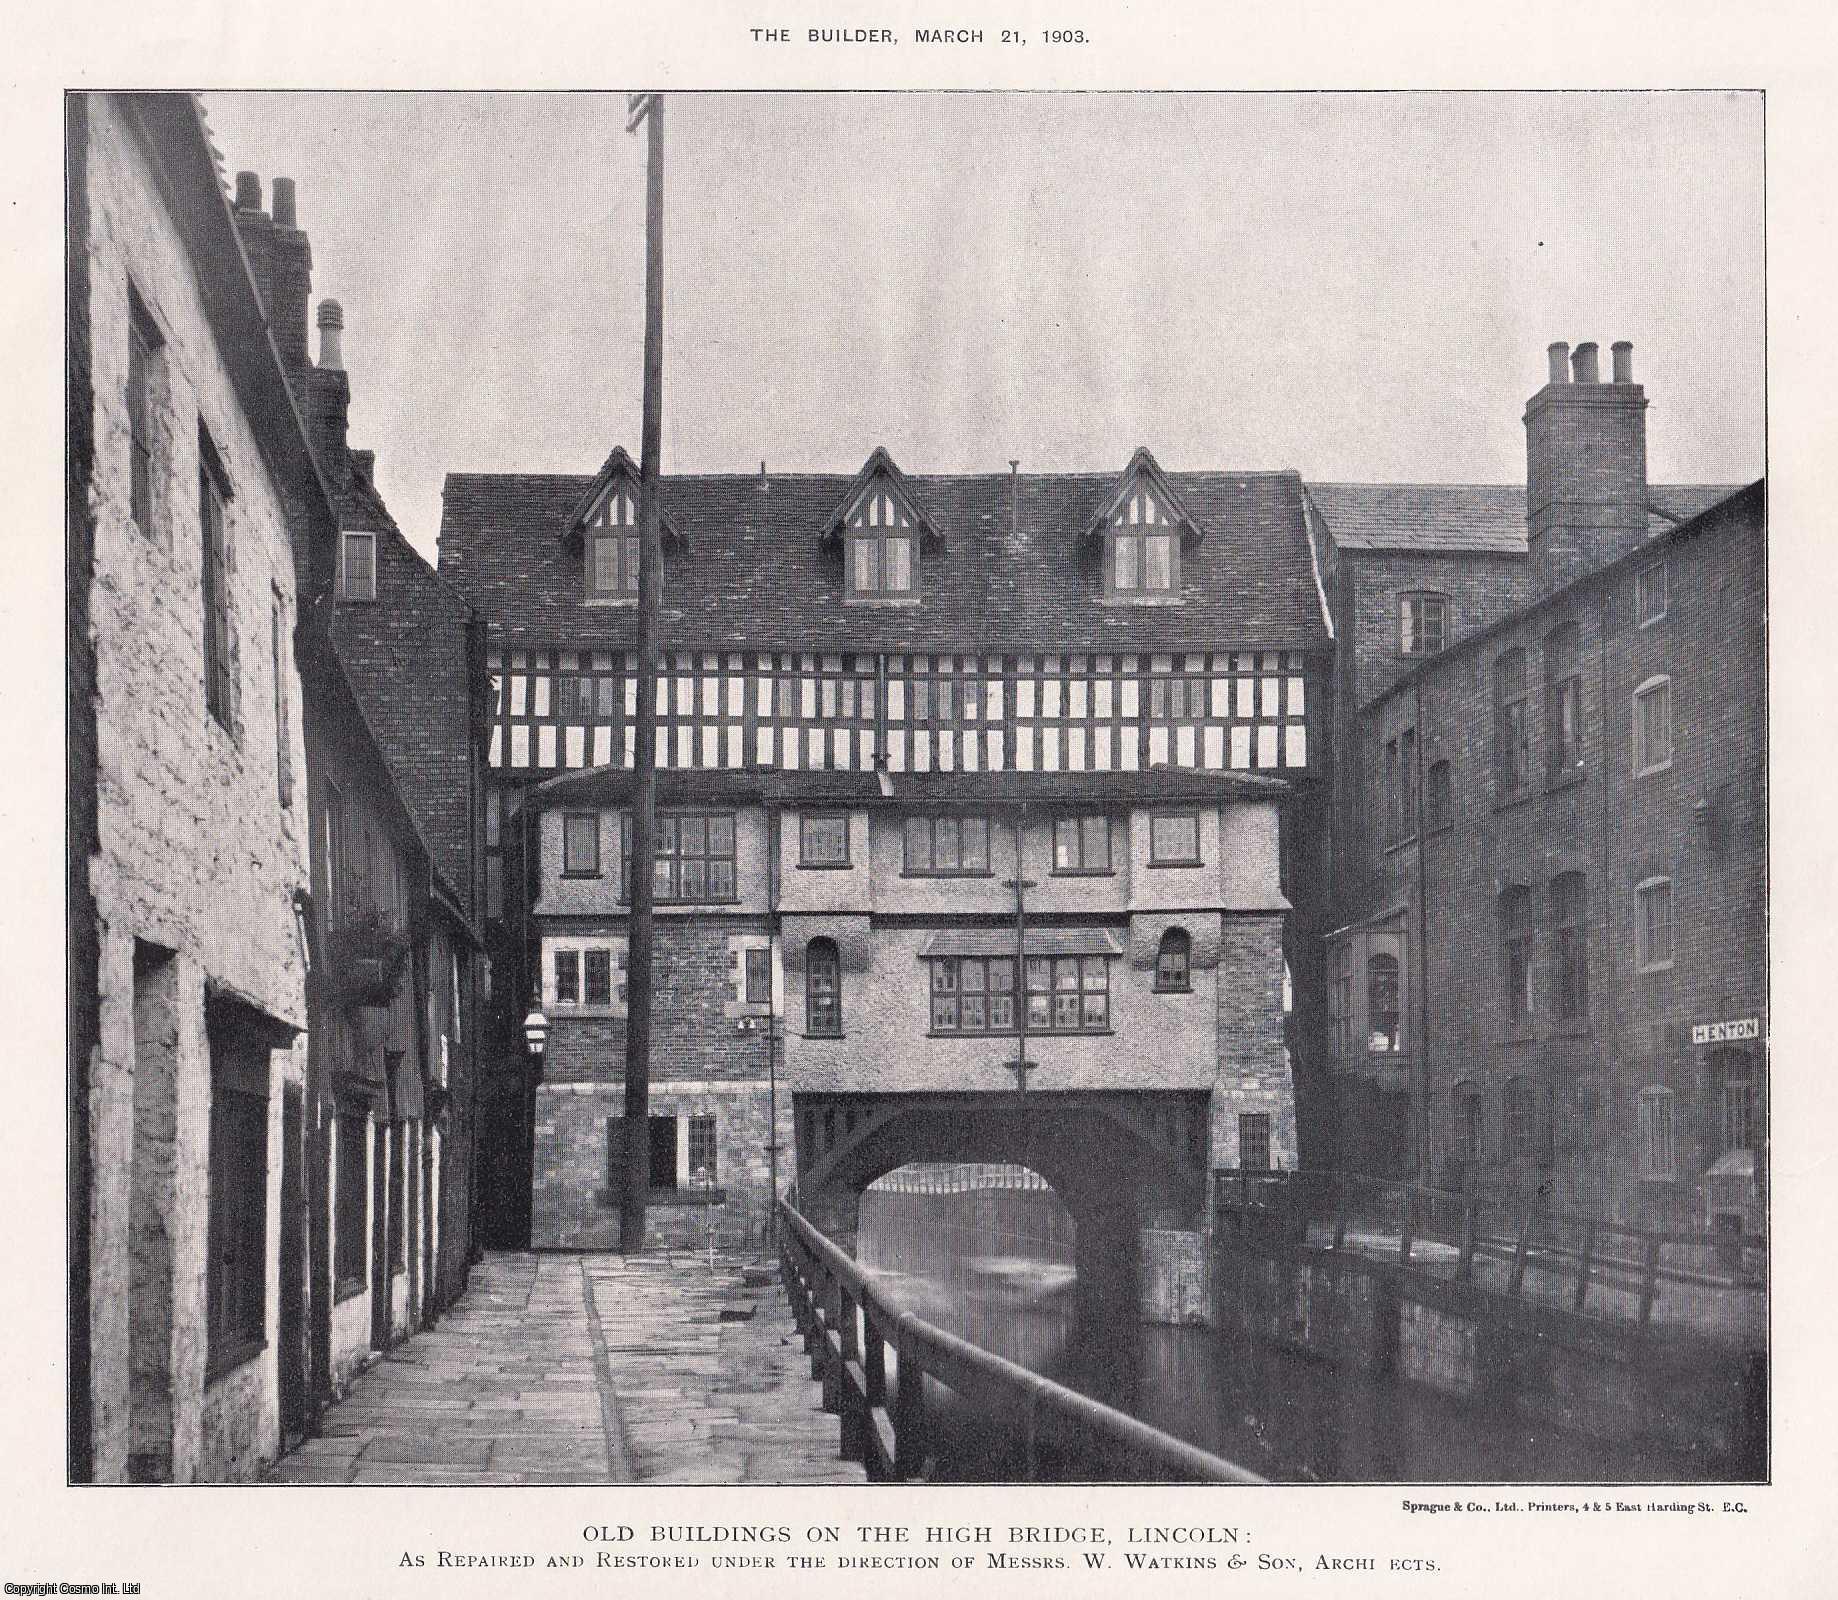 OLDEST BRIDGE IN THE UK ON WHICH BUILDINGS STAND - 1903 : Old Buildings on the High Bridge (the Glory Hole), Lincoln. As Repaired and Restored under the Direction of W. Watkins & Son, Architects. An original page from The Builder. An Illustrated Weekly Magazine, for the Architect, Engineer, Archaeologist, Constructor, & Art-Lover.